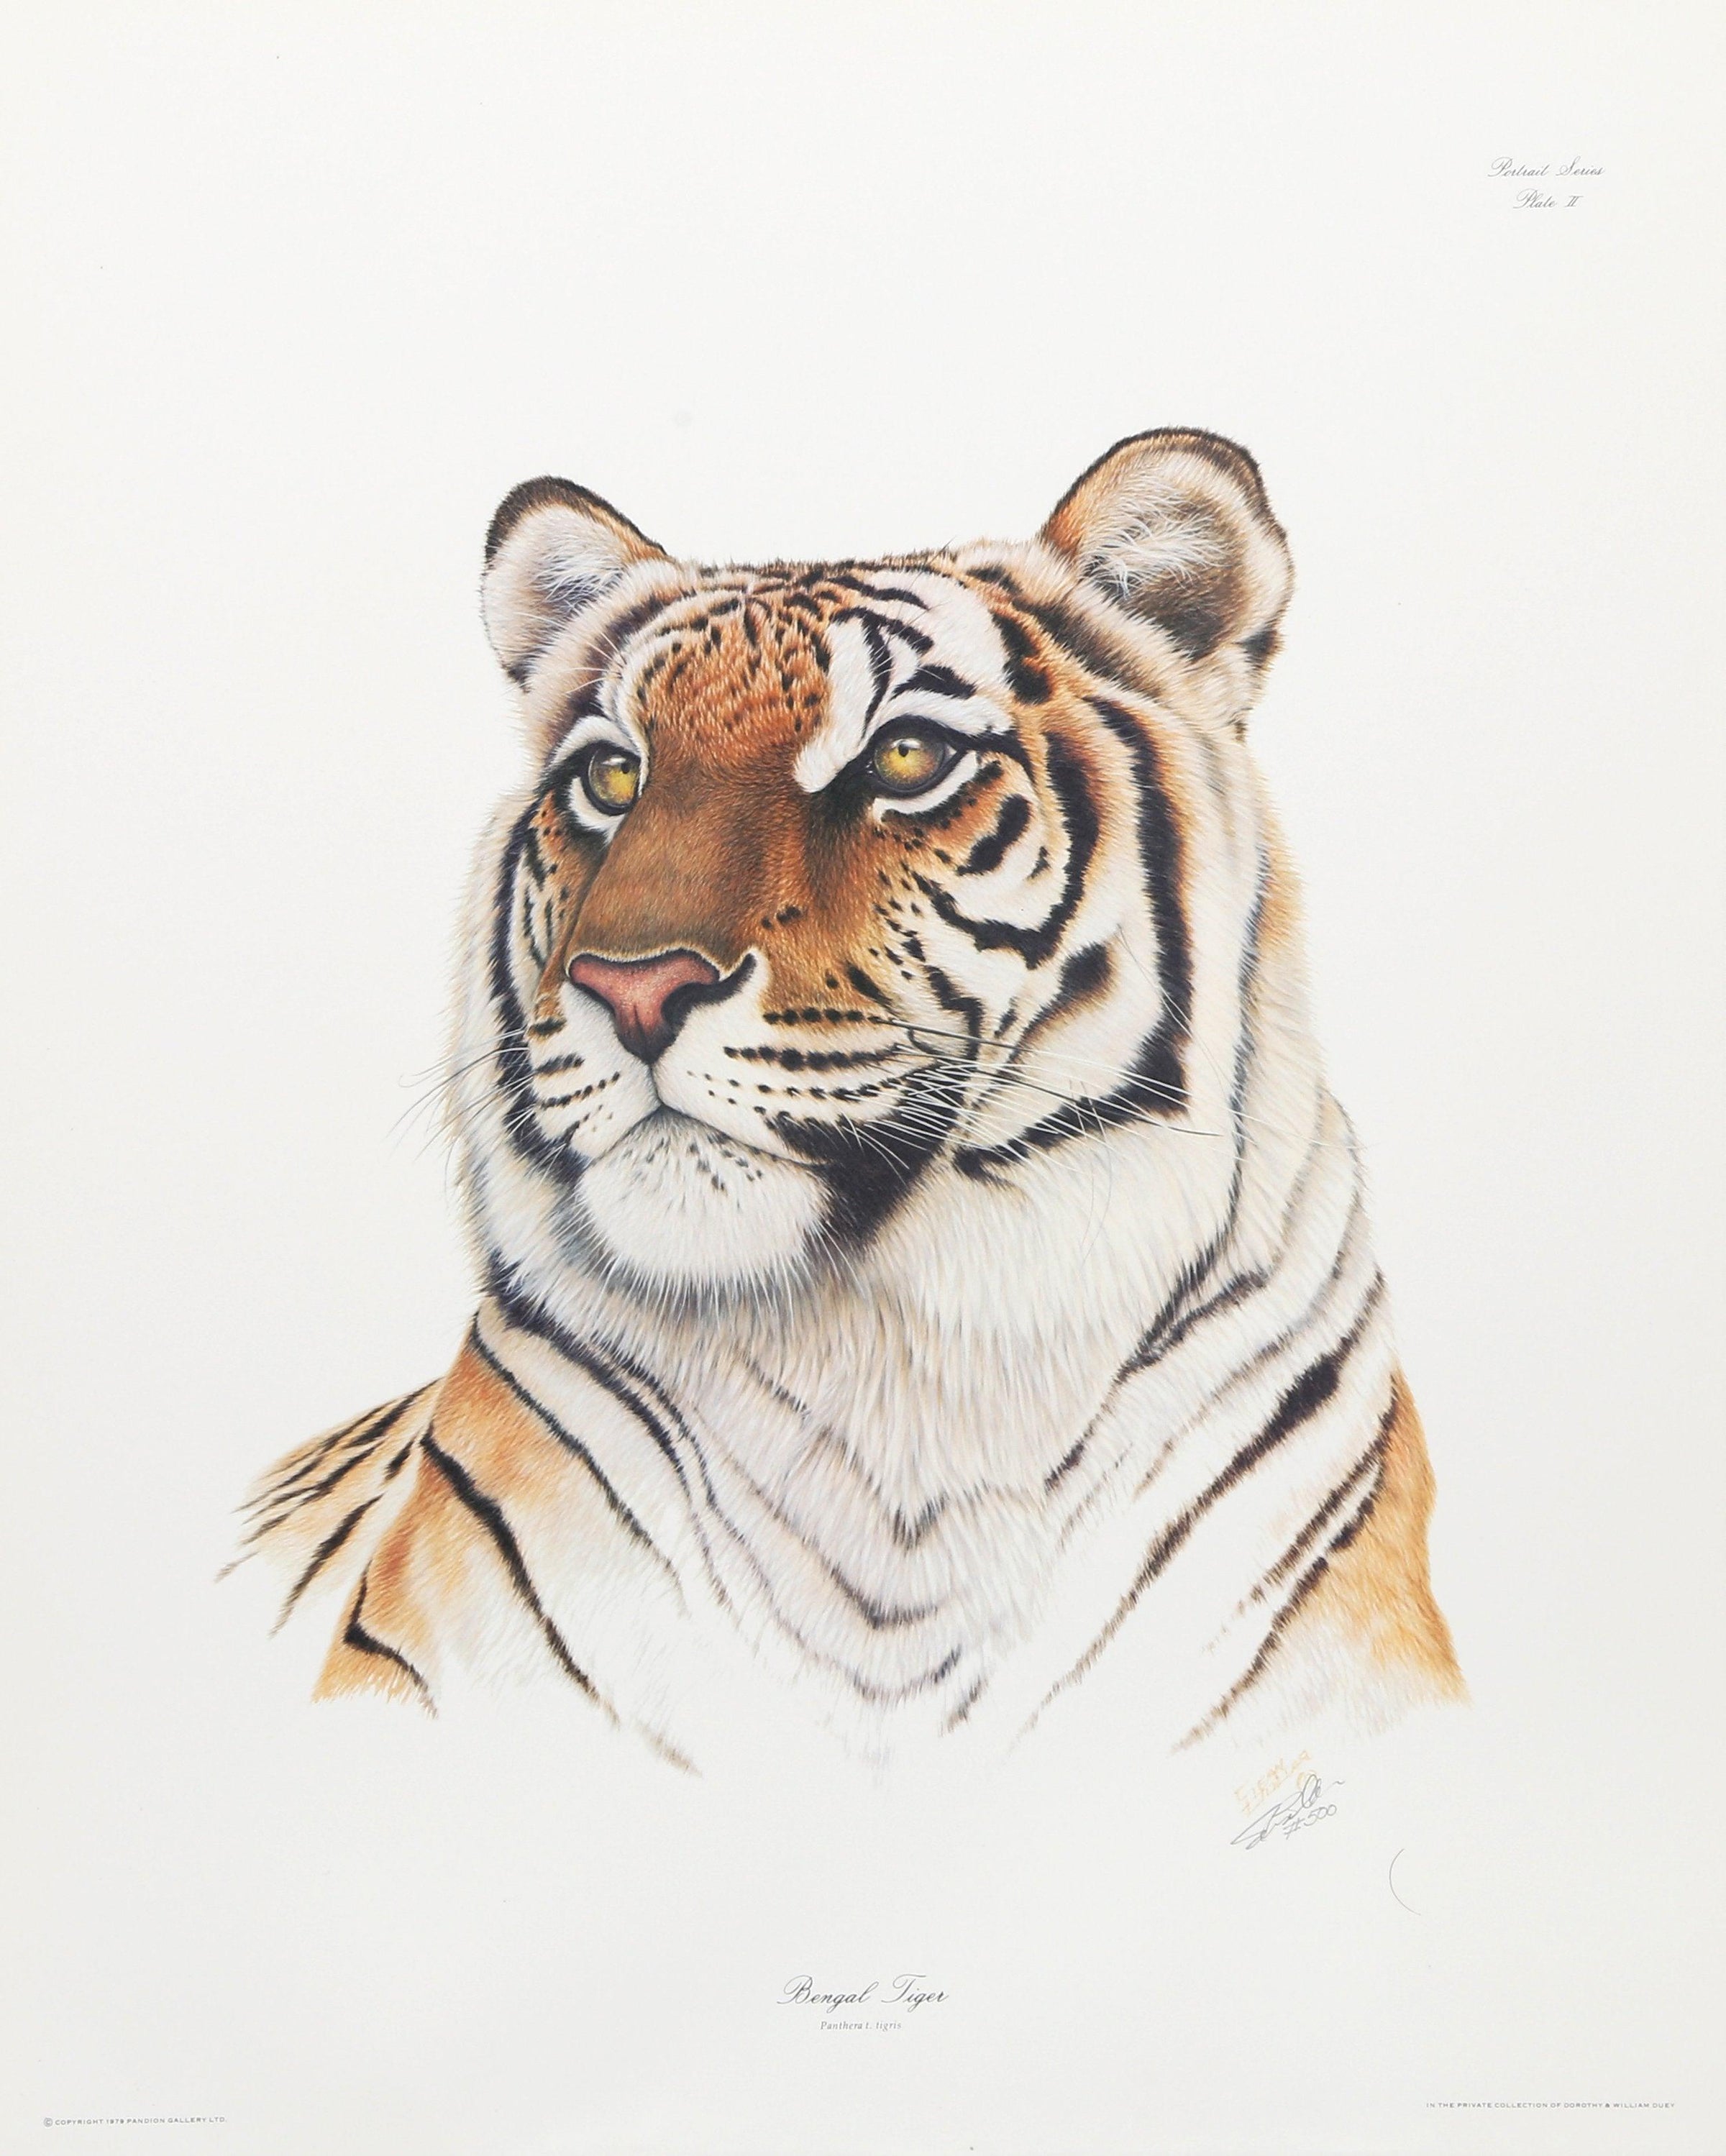 How To Draw A Bengal Tiger, Draw Tigers, Step by Step, Drawing Guide, by  MichaelY - DragoArt, bengal tiger - hpnonline.org